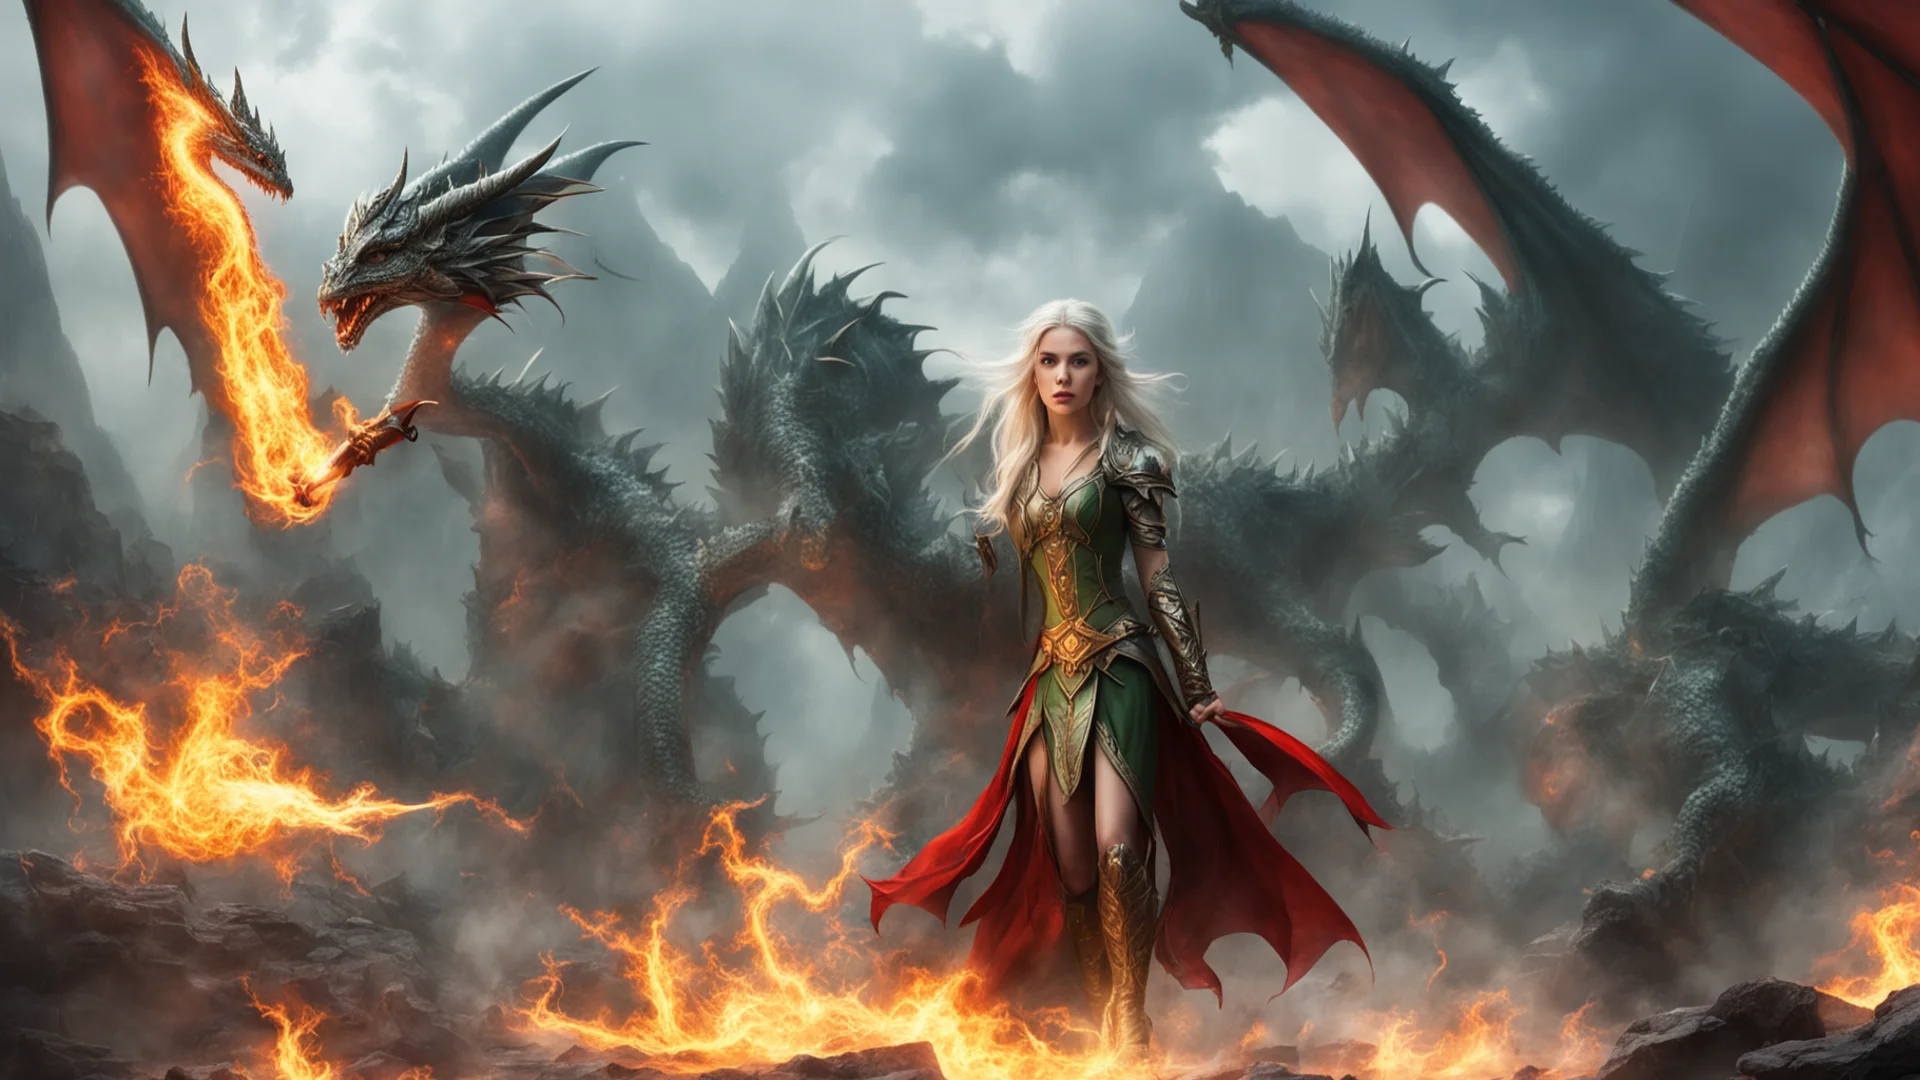 elven princess casts a spell in front of attacking dragon wide